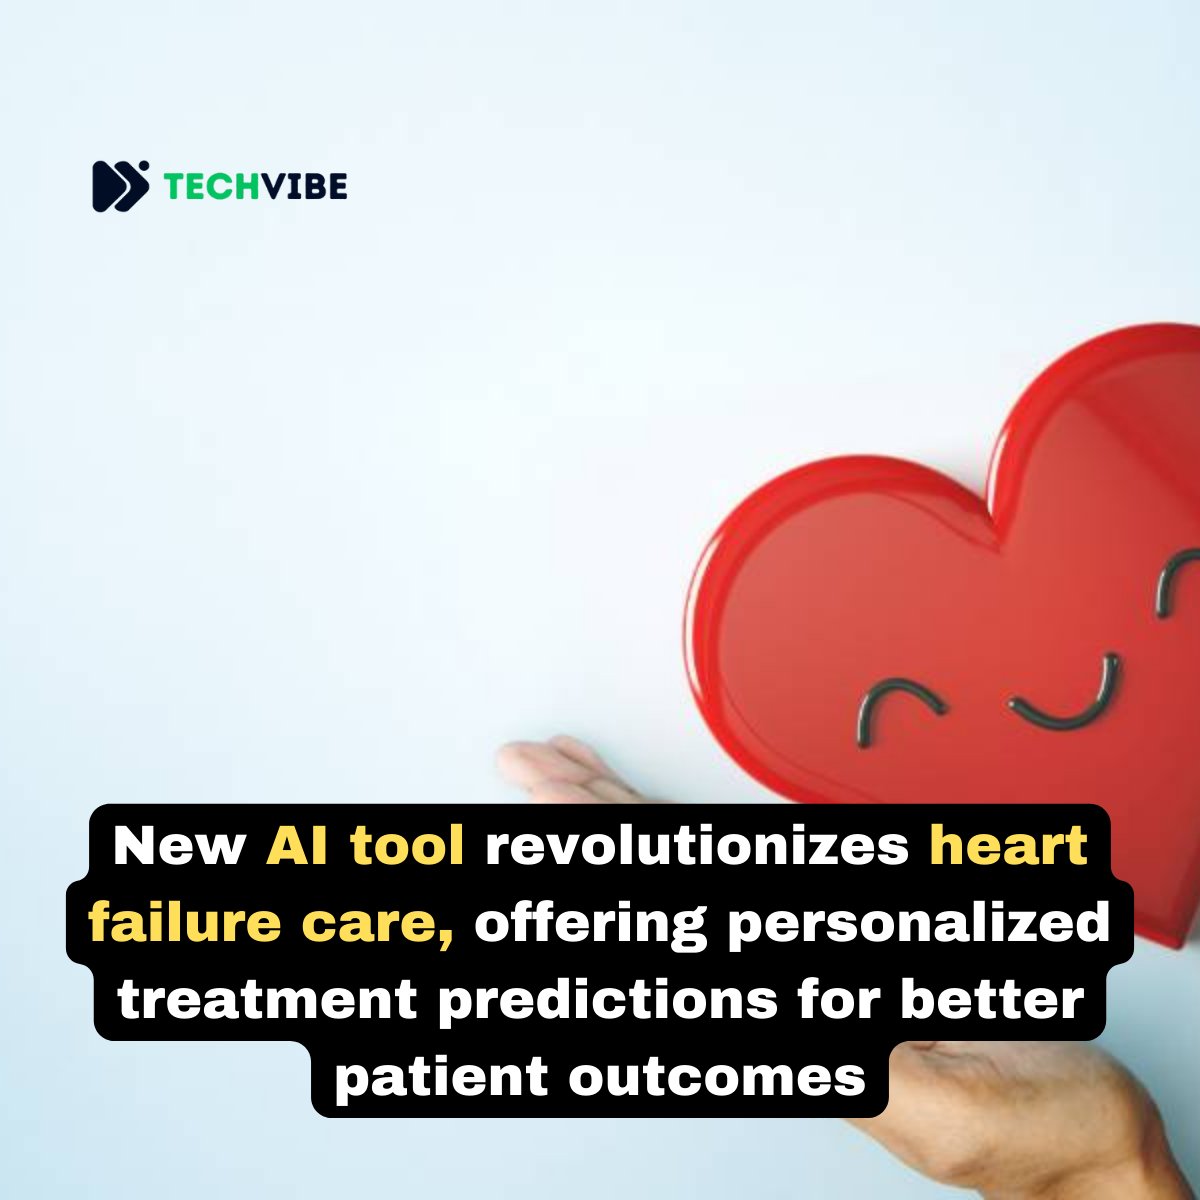 Groundbreaking AI tool developed by UVA Health researchers enhances heart failure care by providing personalized treatment predictions, potentially improving patient outcomes and revolutionizing healthcare. more: t.ly/28rDs #Hearthealth #AI #AItool #UVA